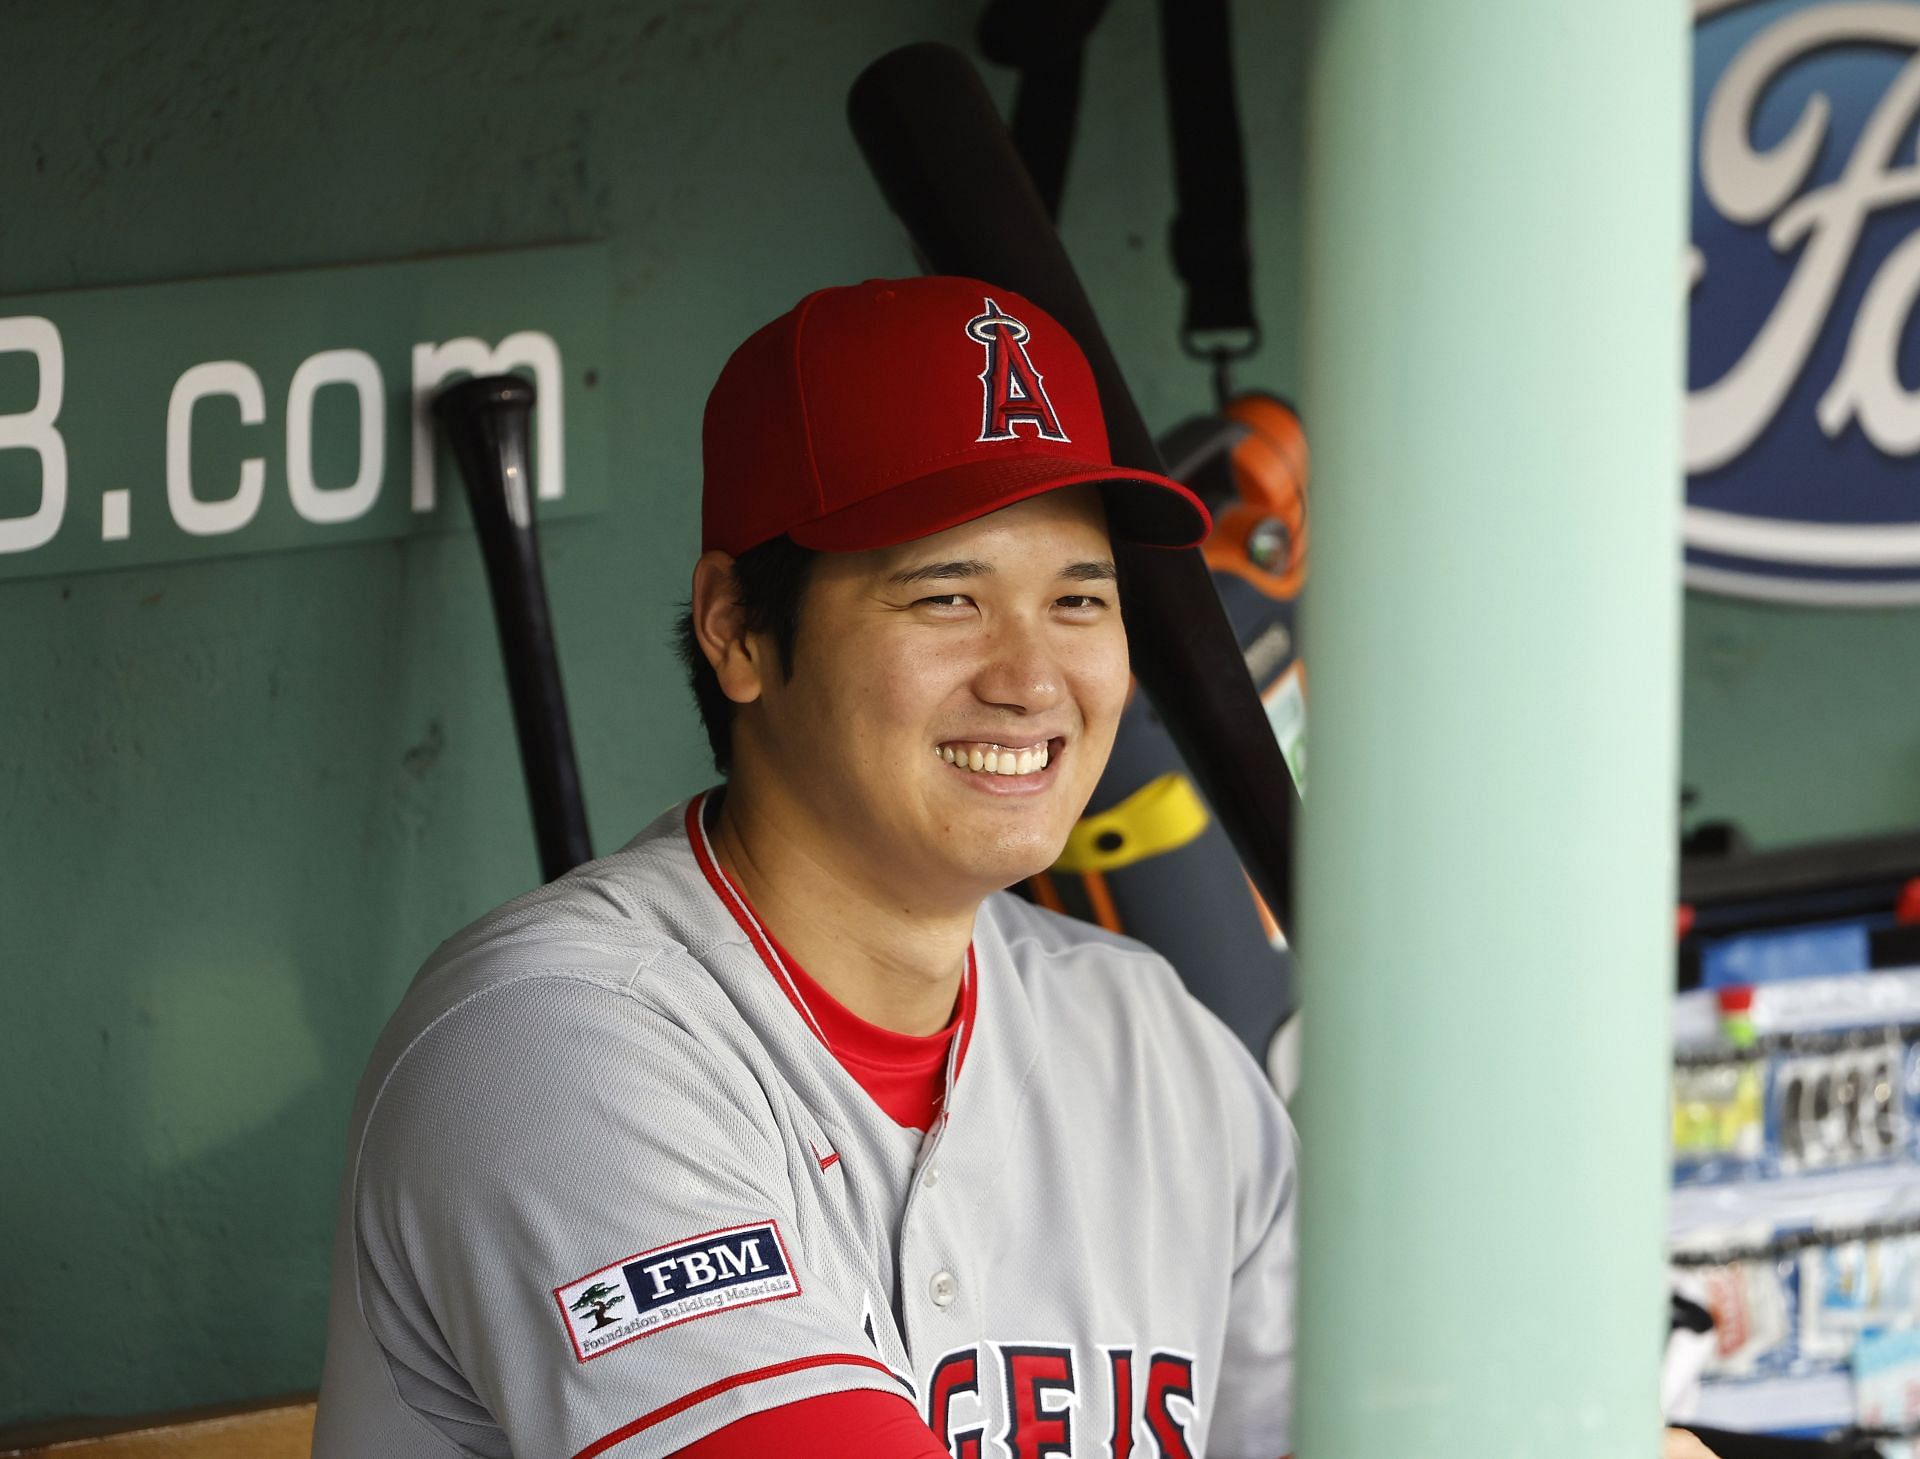 Shohei Ohtani: The Padres have laid the groundwork to sign the